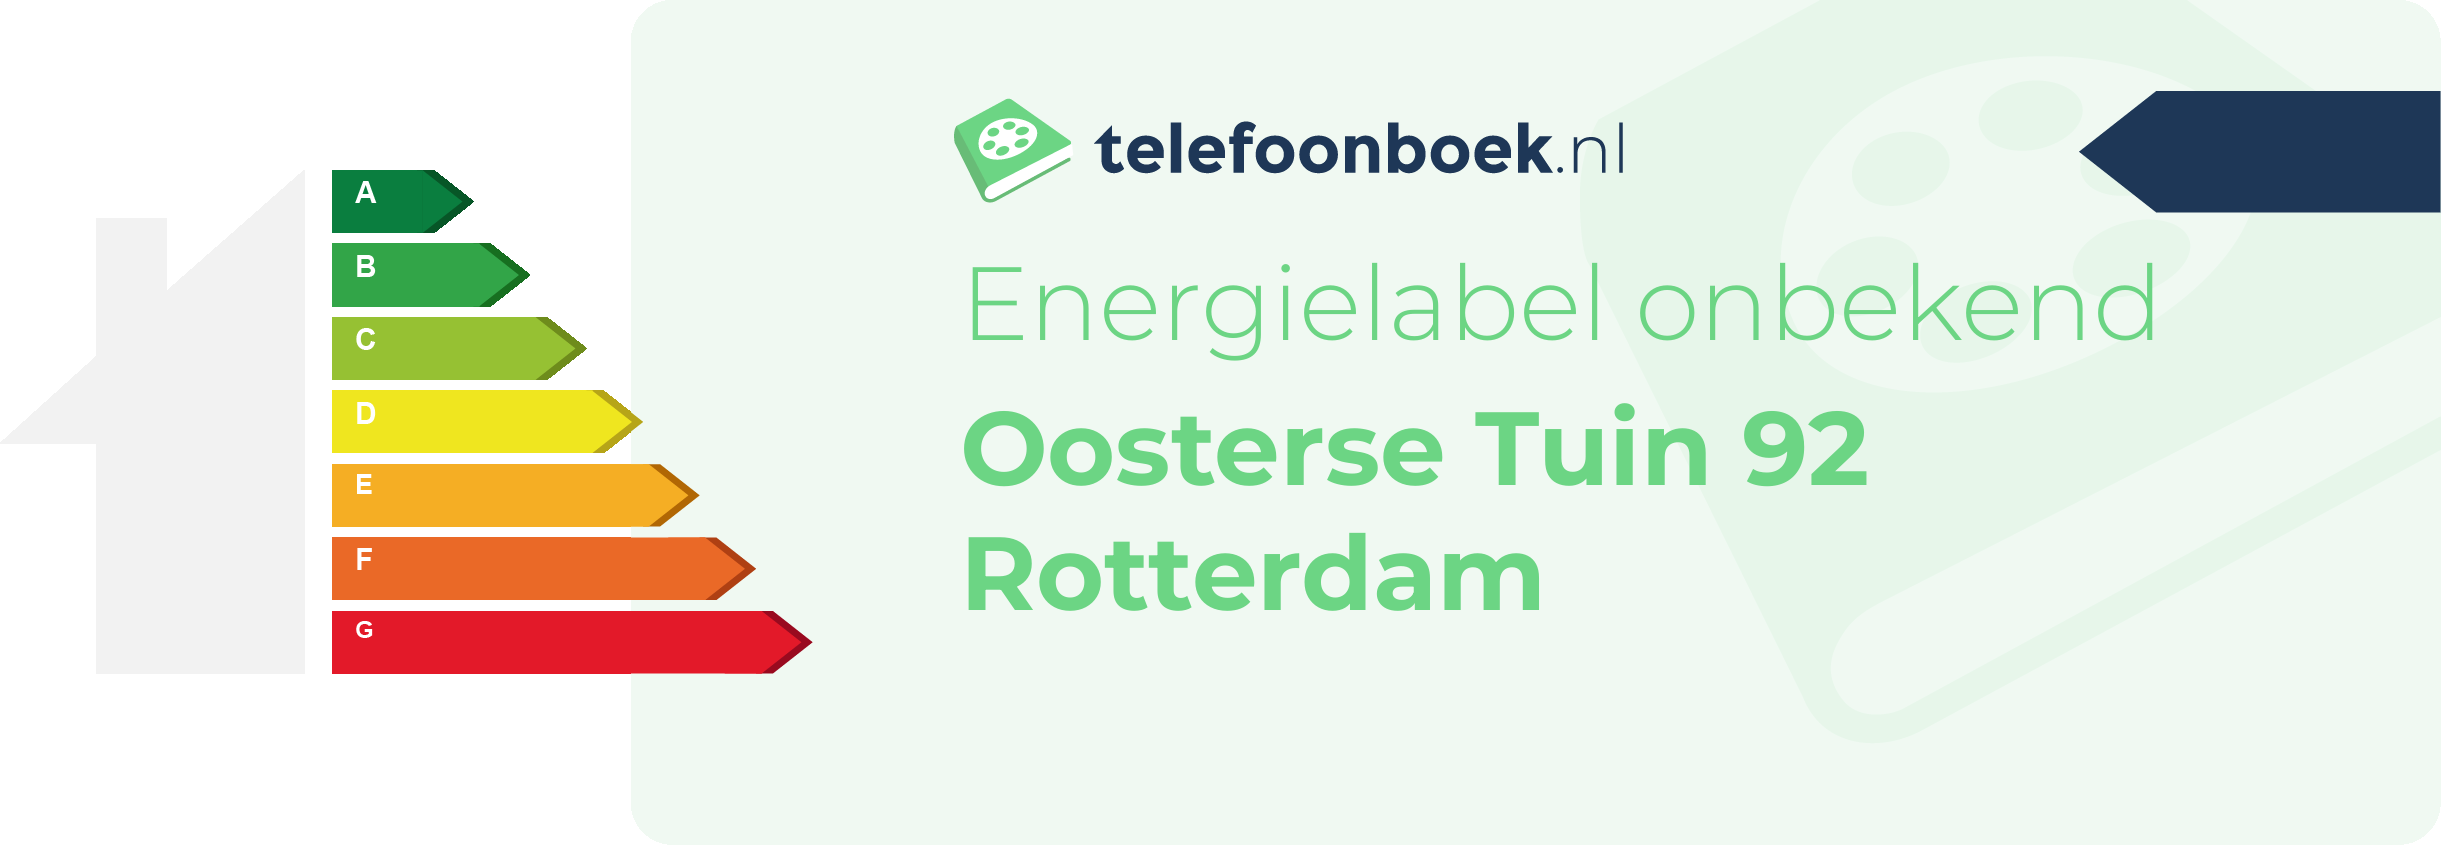 Energielabel Oosterse Tuin 92 Rotterdam